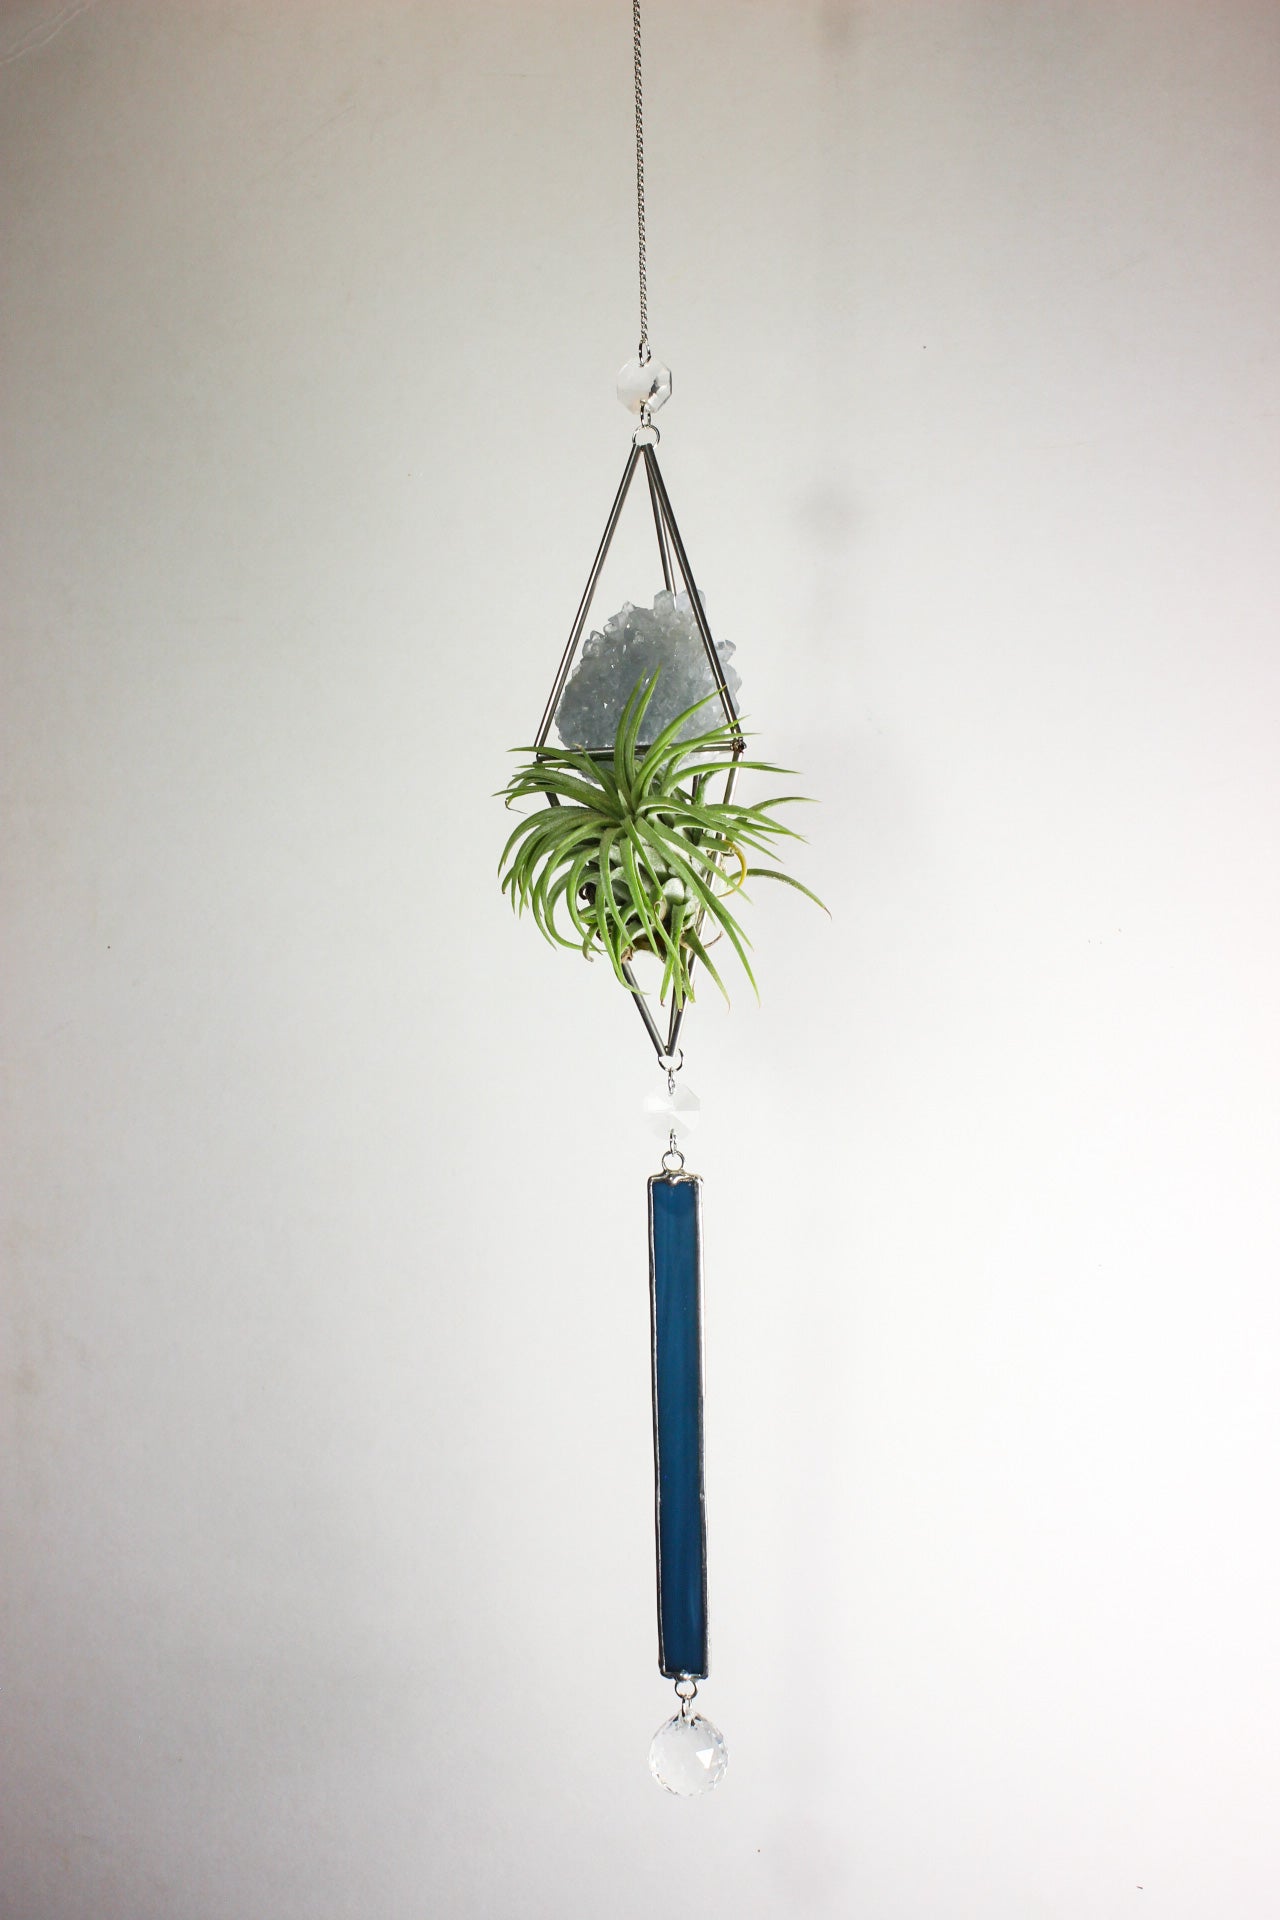 Celestite Crystal Stained Glass Sun Catcher with Air Plant